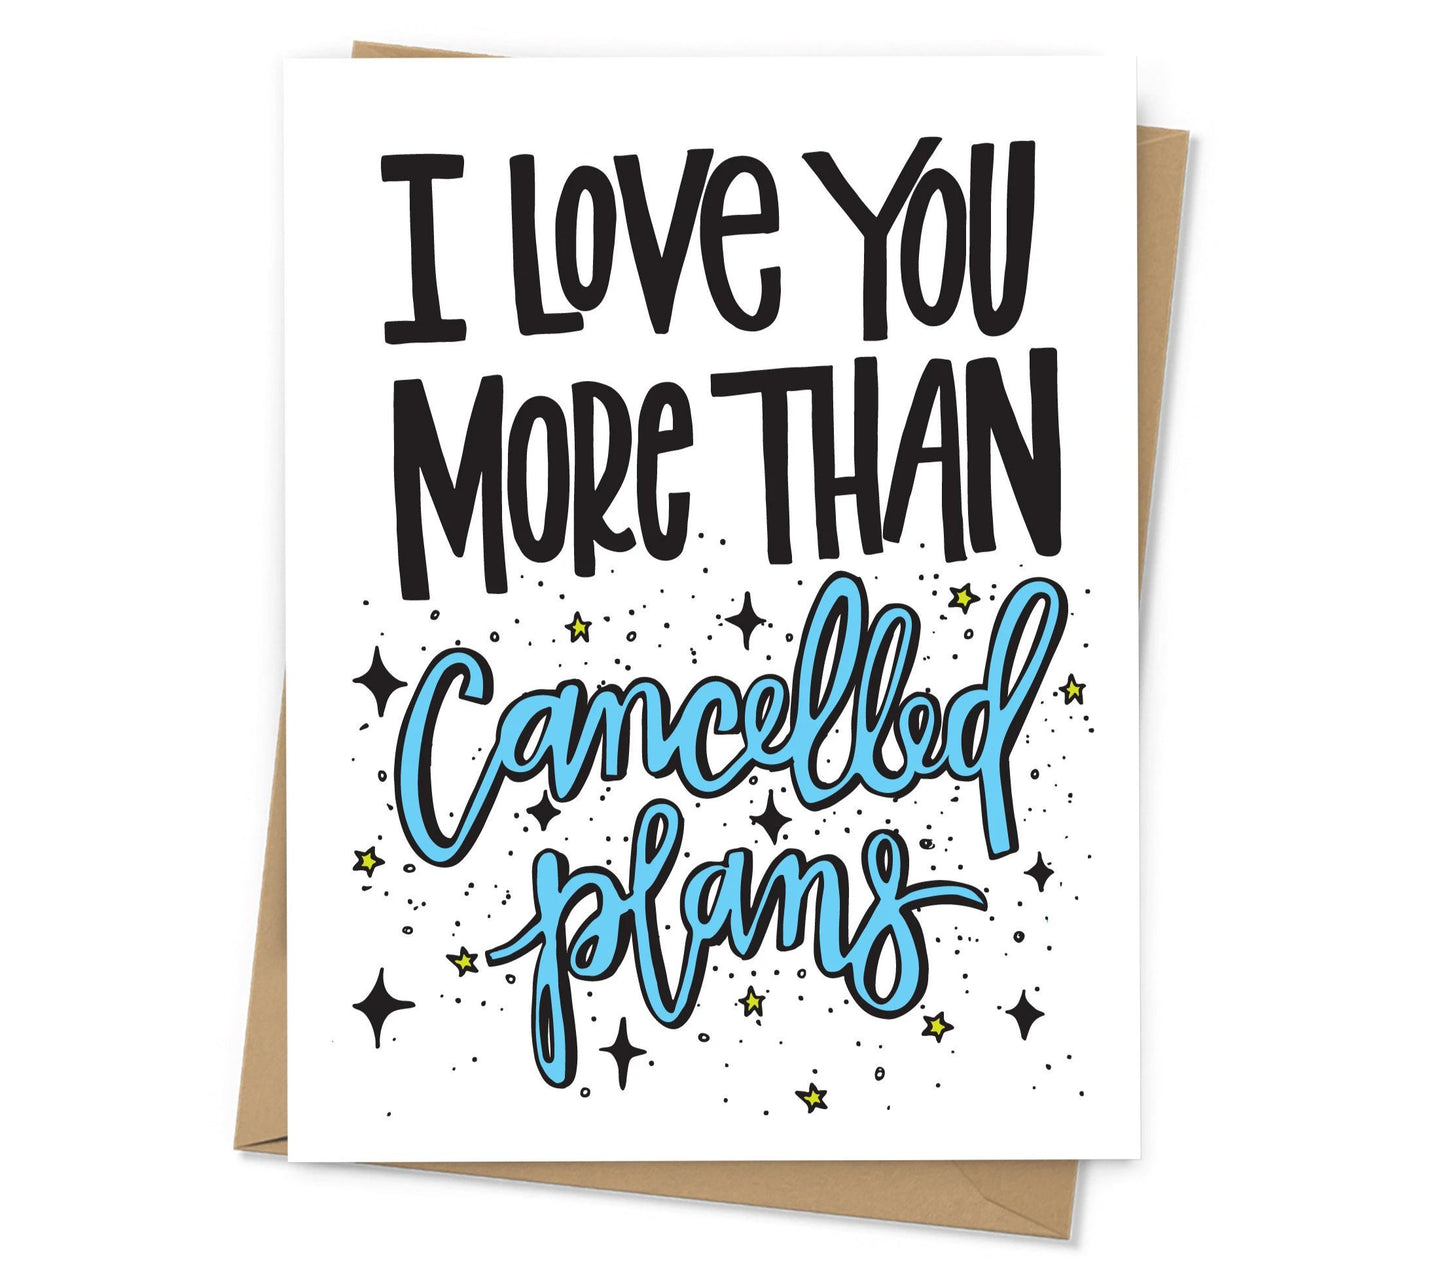 Cancelled Plans Love Card